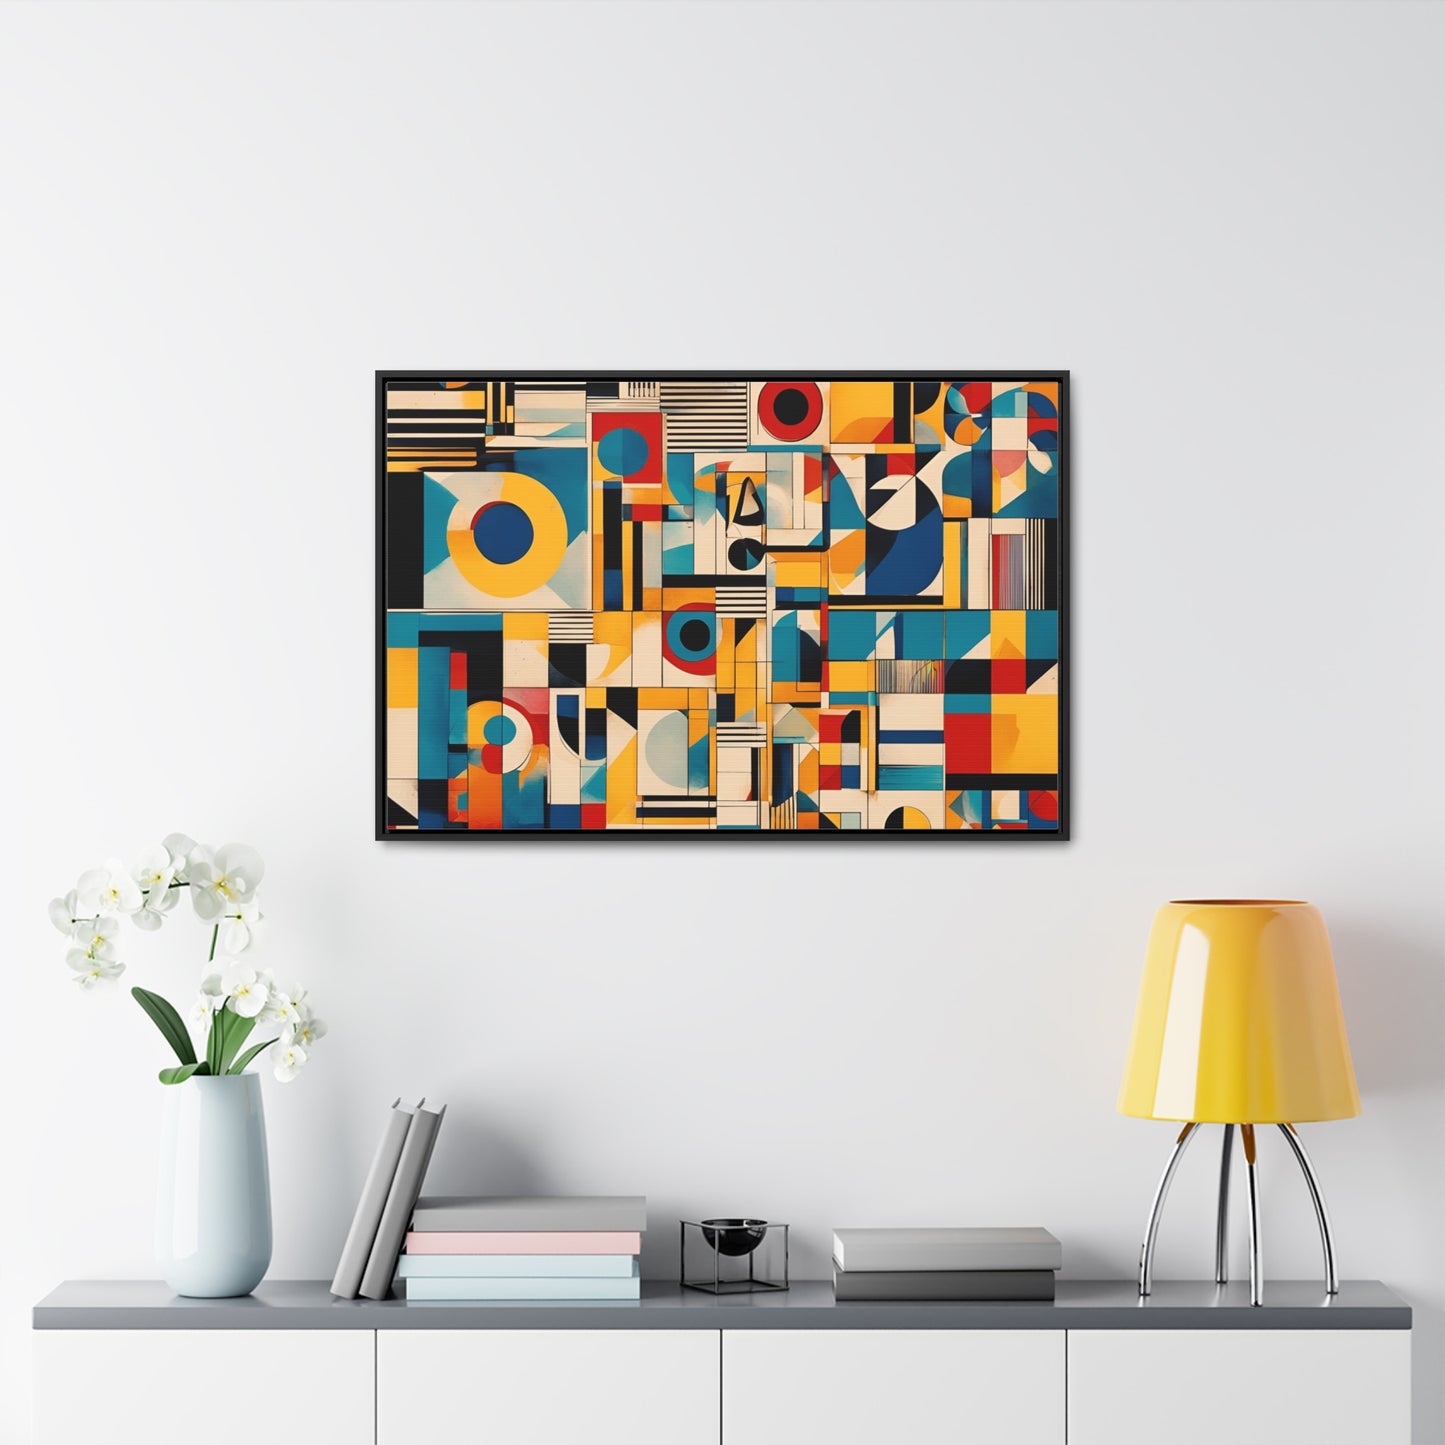 Bold Mid Century Modern Wall Art Print on Canvas in a Floating Frame 30x20